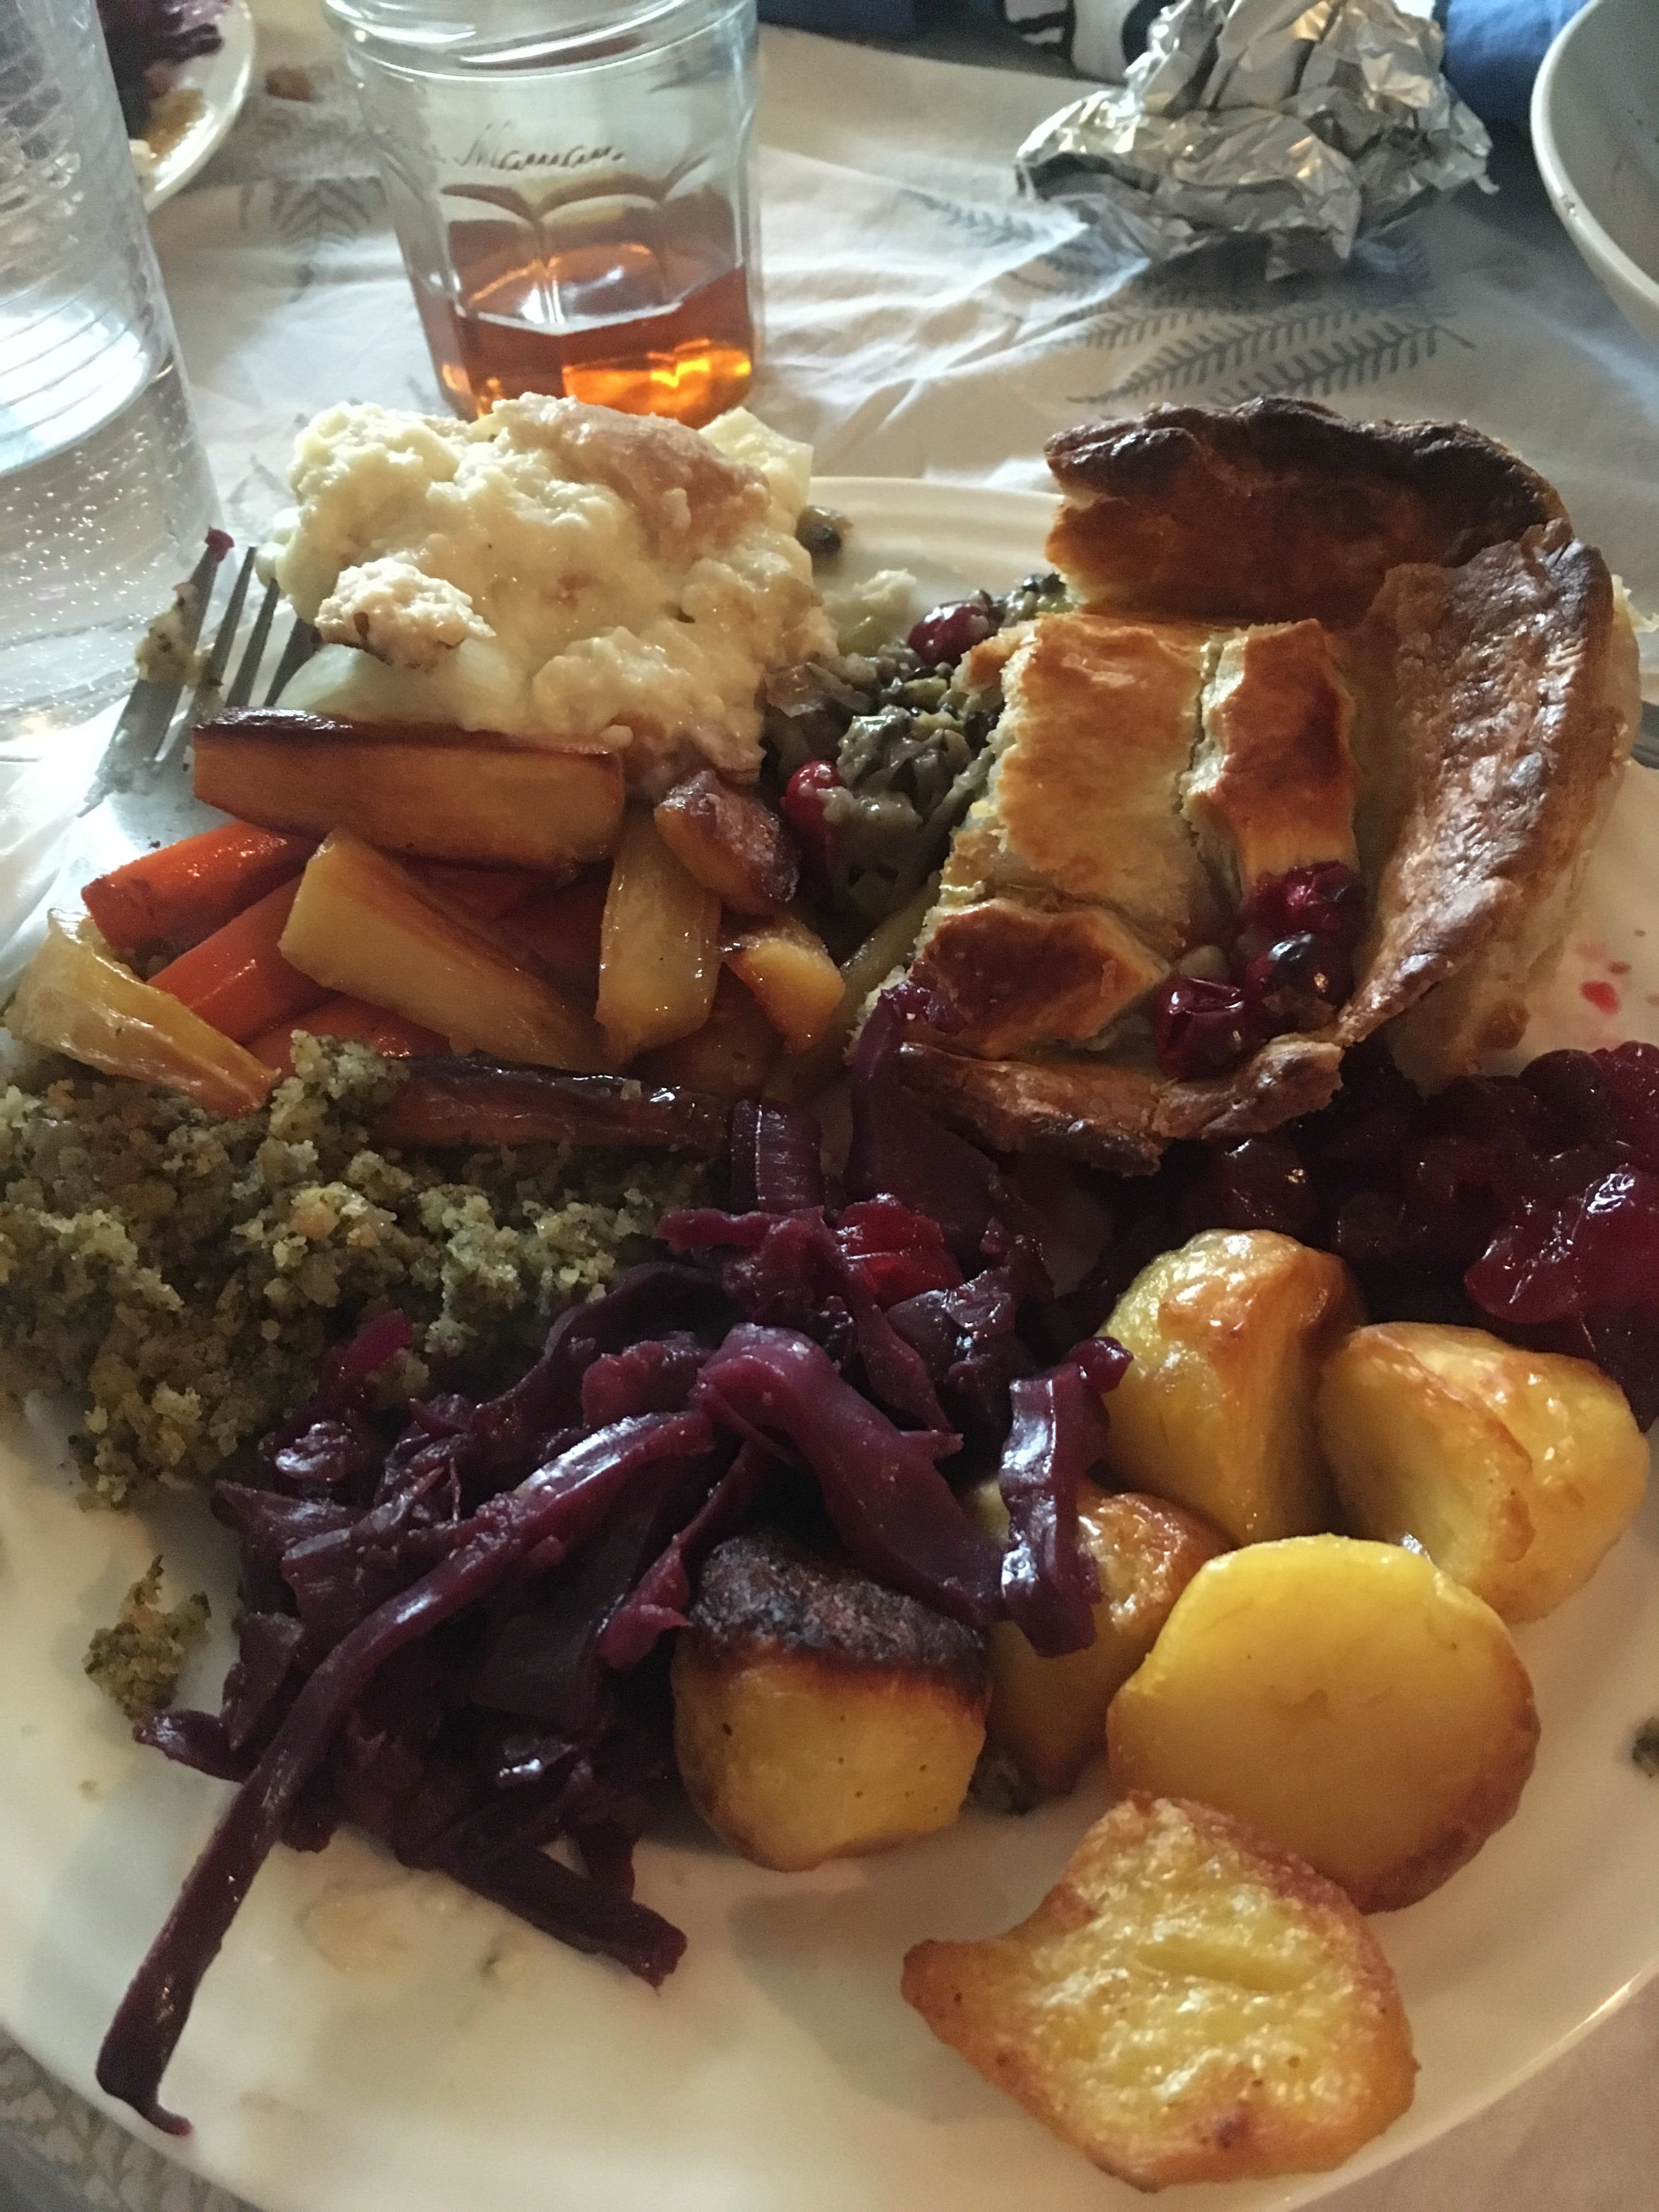 British Christmas Dinner Recipe: What Goes in a British ...